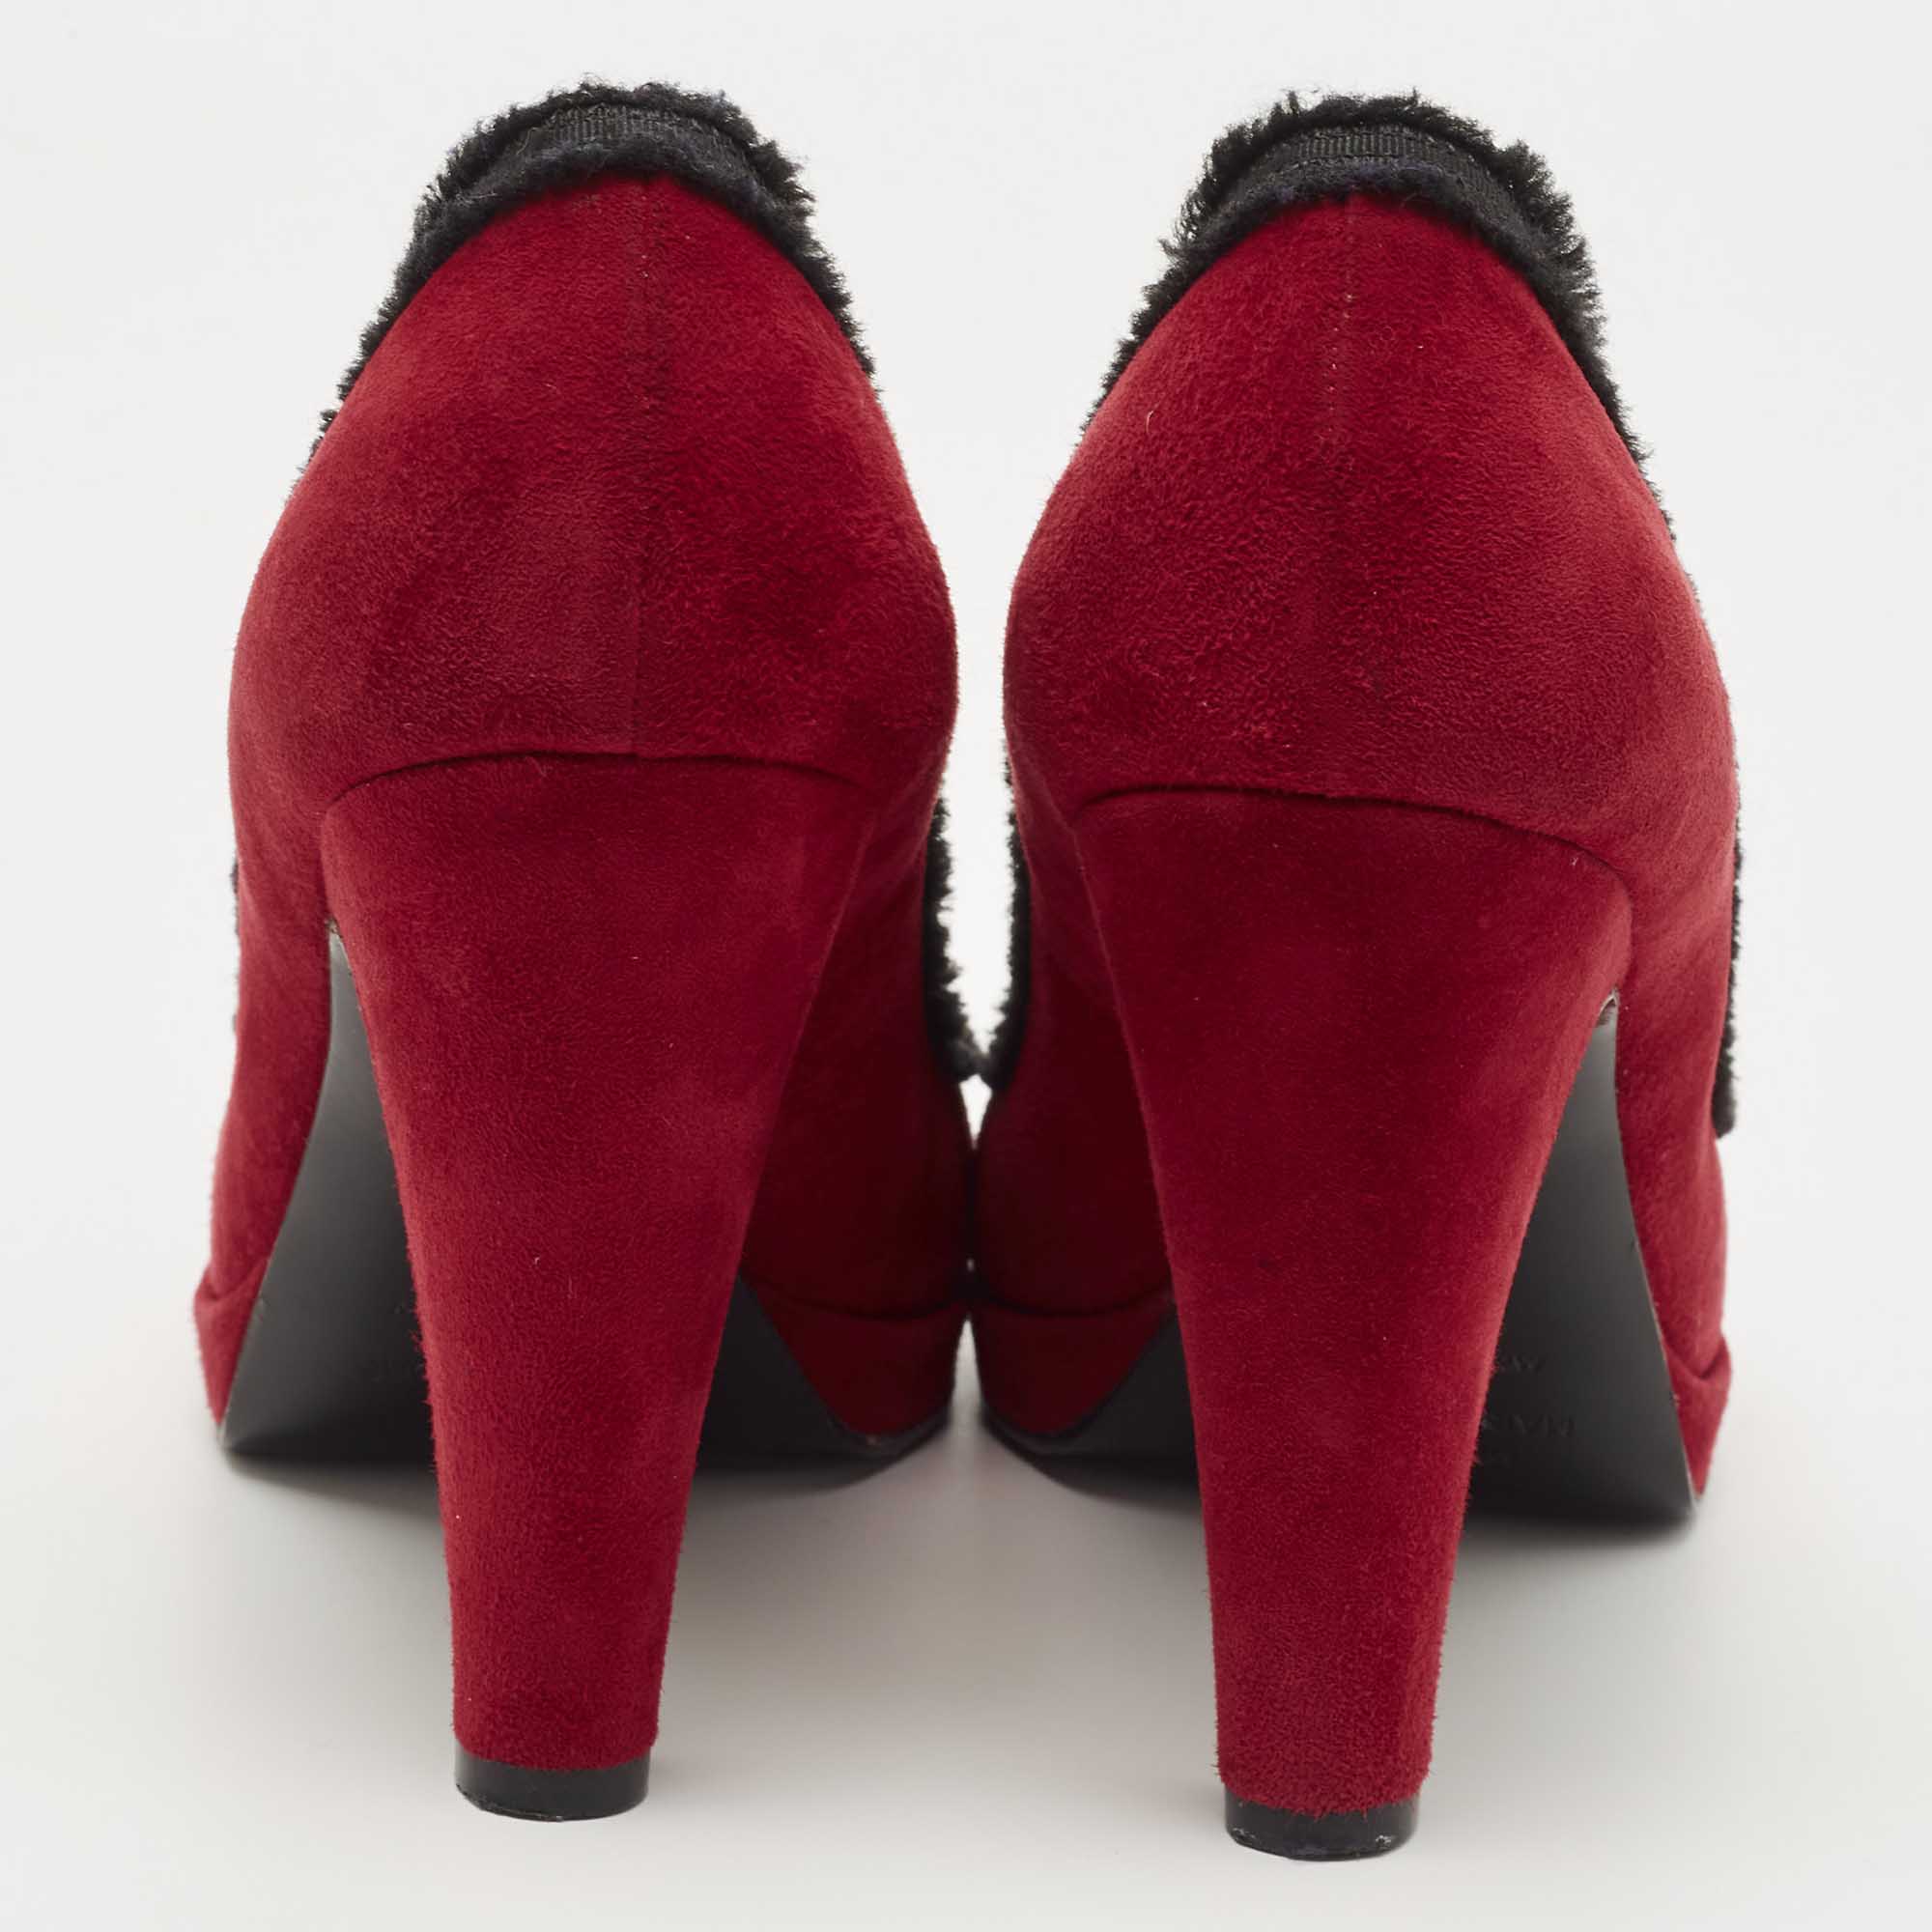 Marc By Marc Jacobs Red/Black Suede Block Heel Pumps Size 38